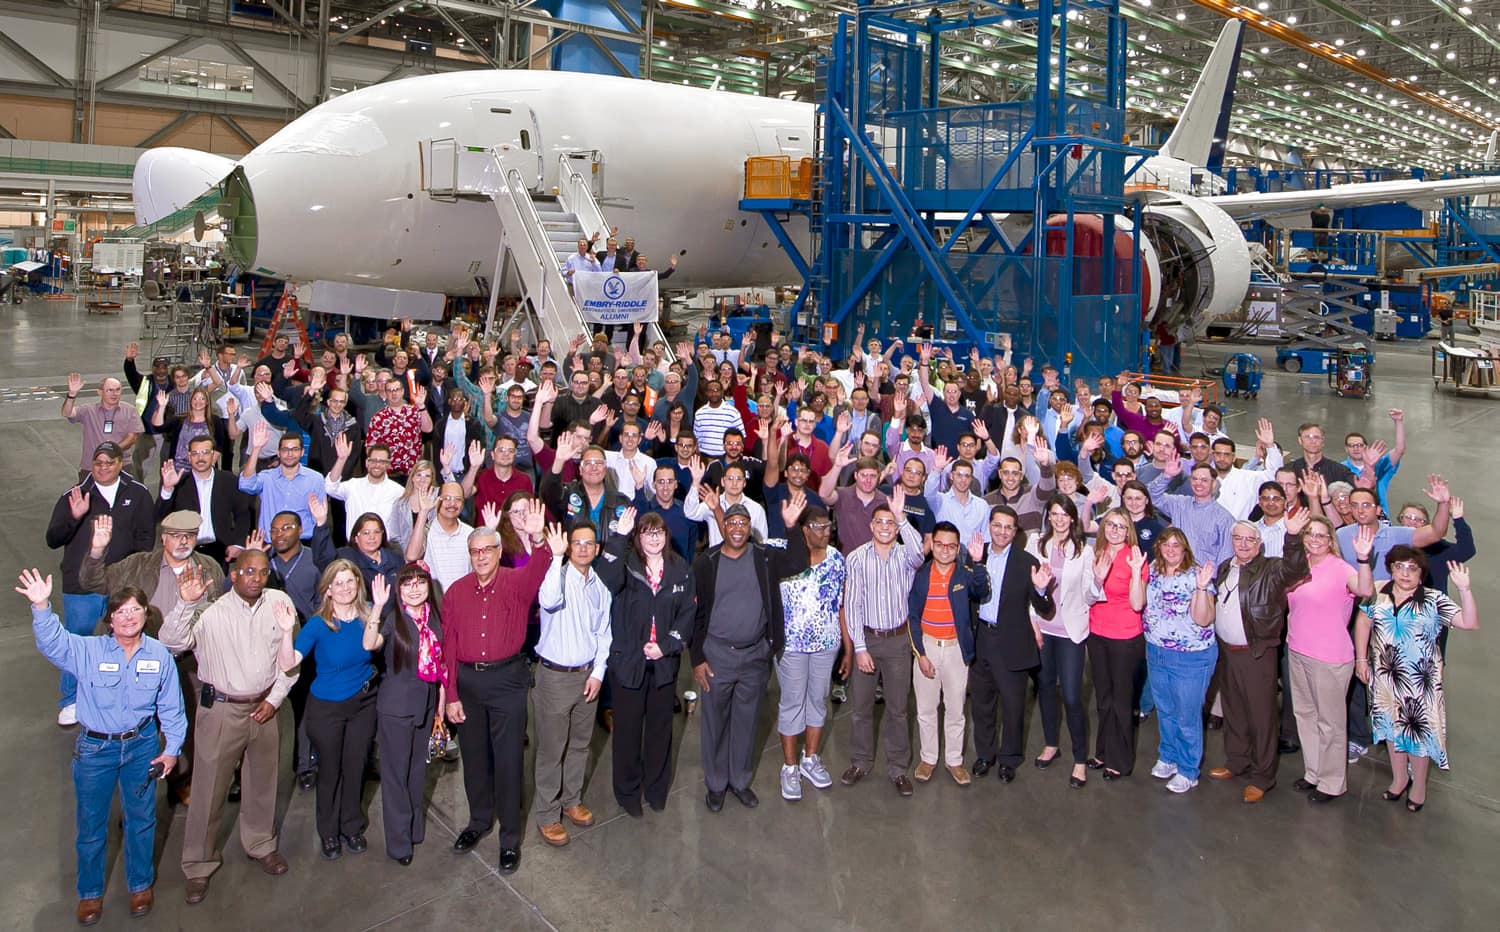 Group of ERAU alumni at a Boeing facility, in front of a large jet plane being built.